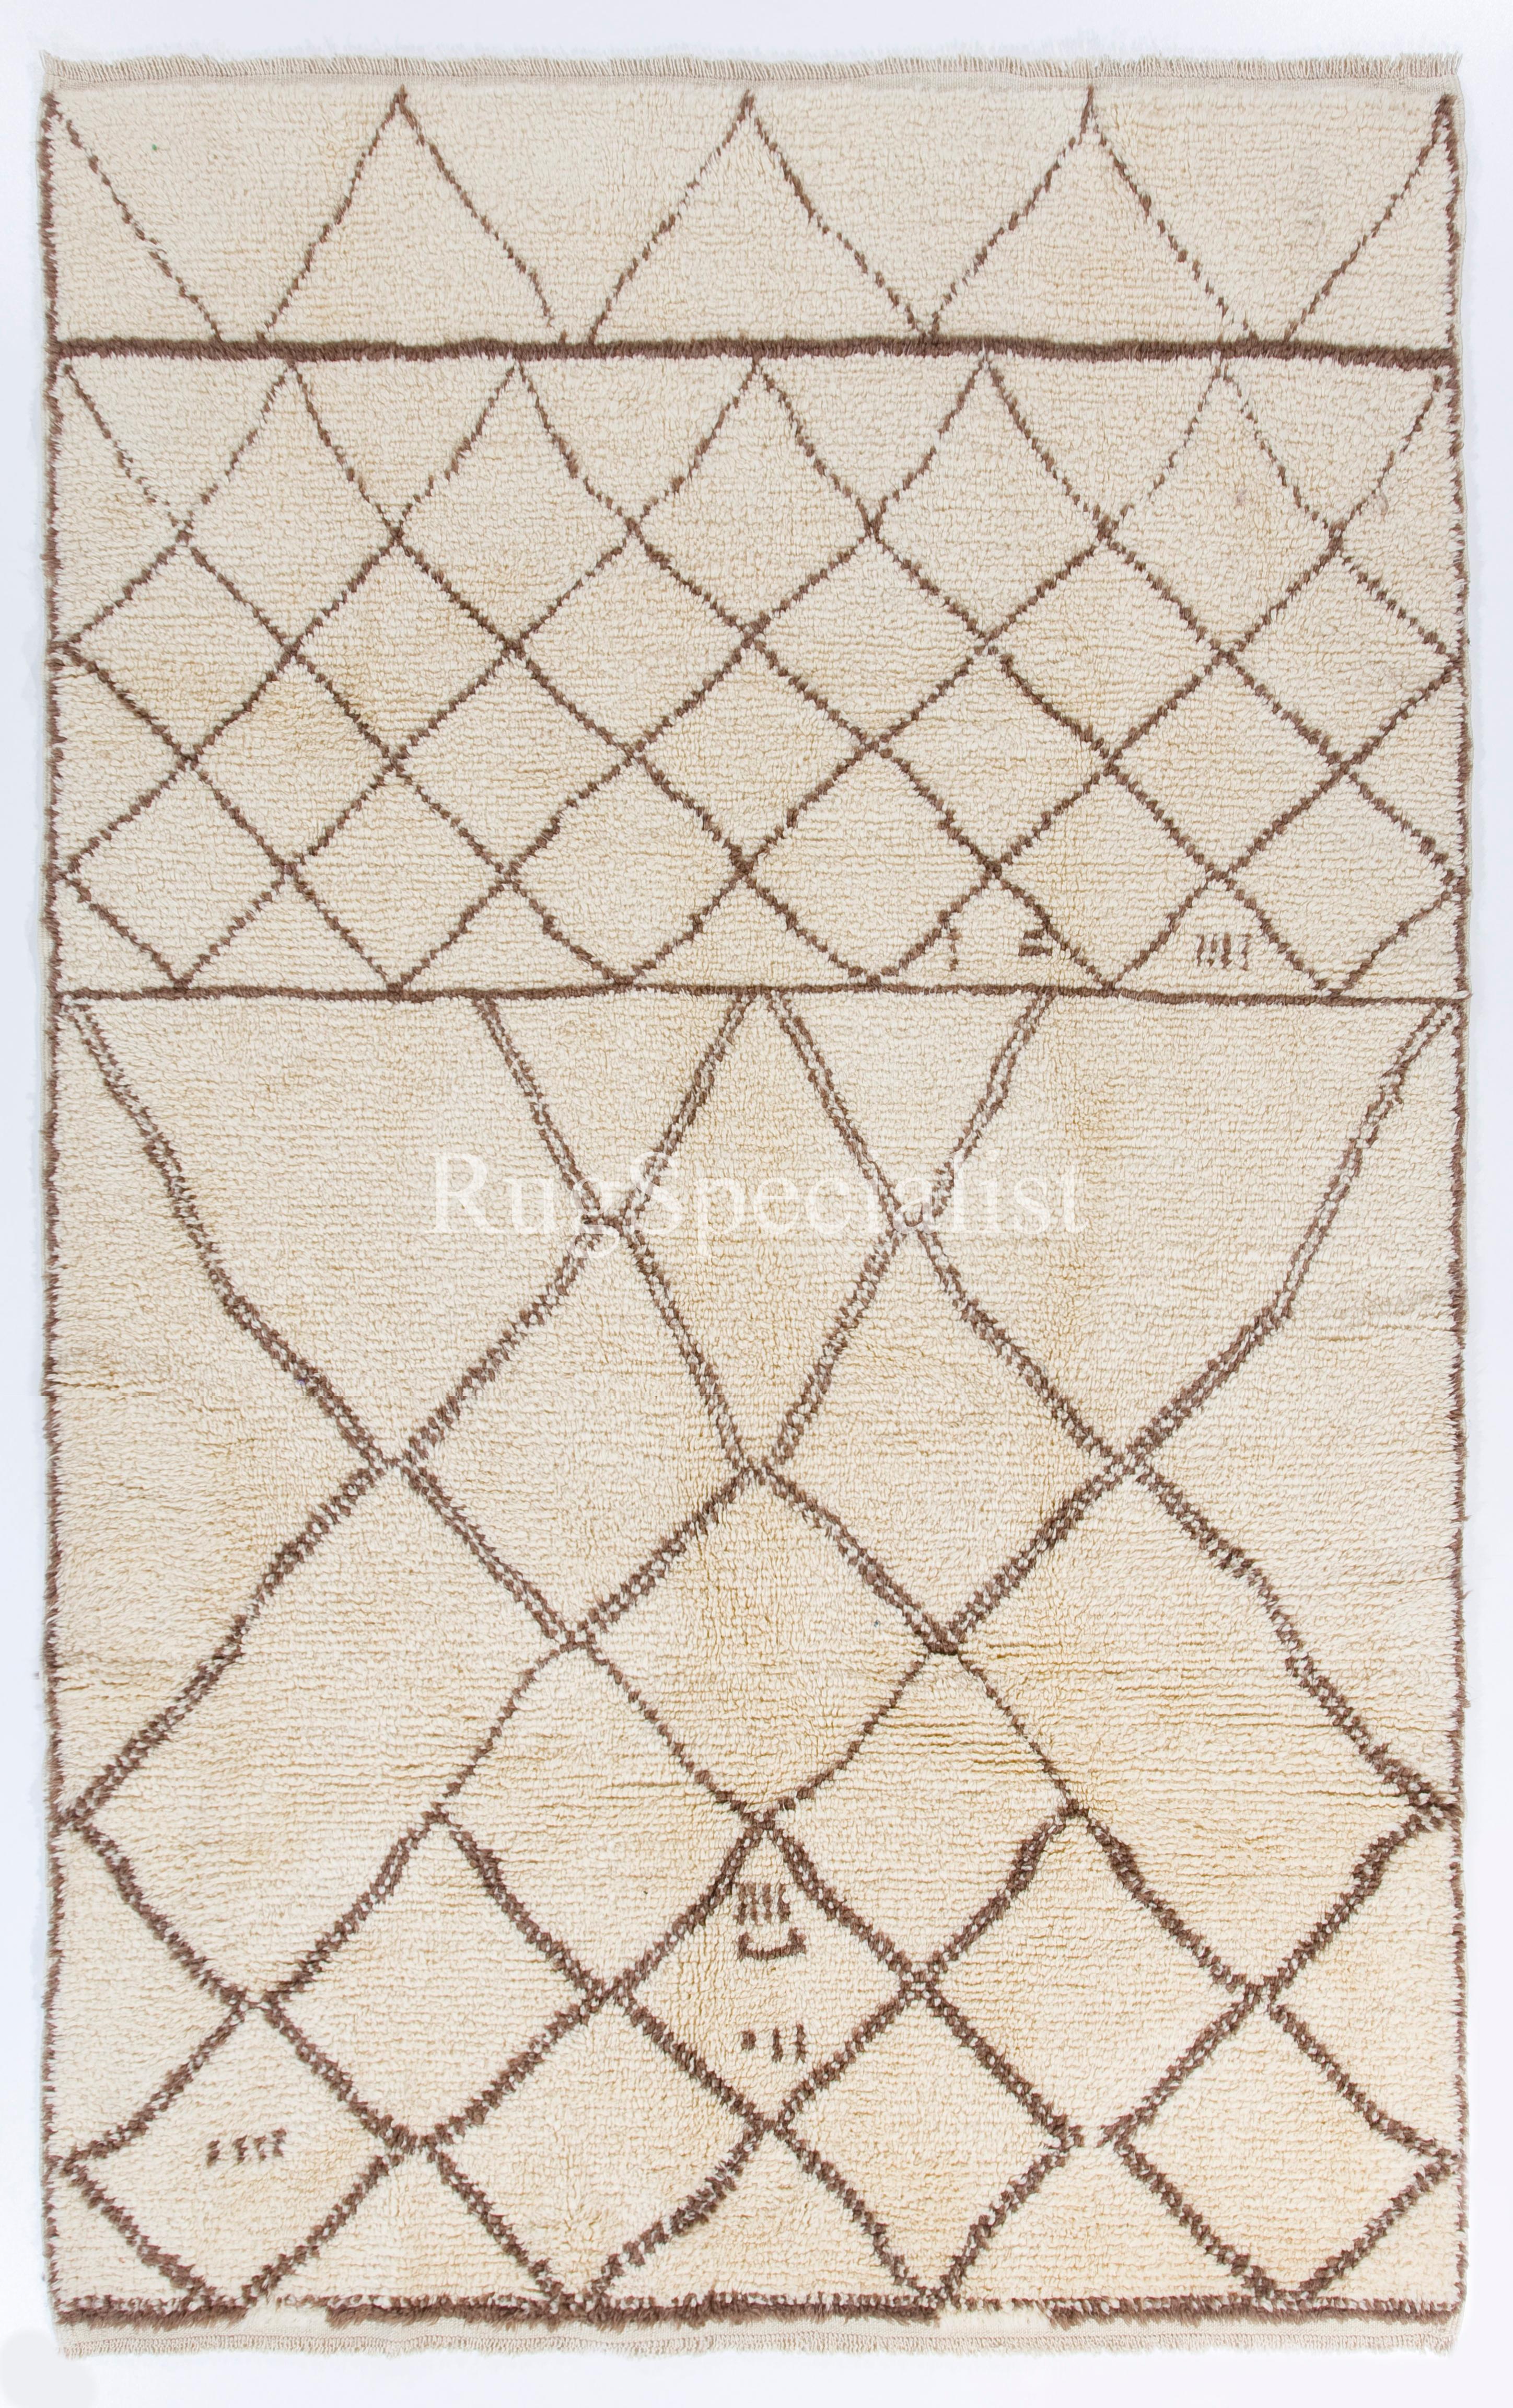 A contemporary hand-knotted Moroccan rug made of natural un-dyed wool. 
Size: 6 x 9.4 ft.
Very soft and comfy, pleasure to walk or lay on. 
Available as it is, in various other sizes or made to measure in any size and color combination requested.